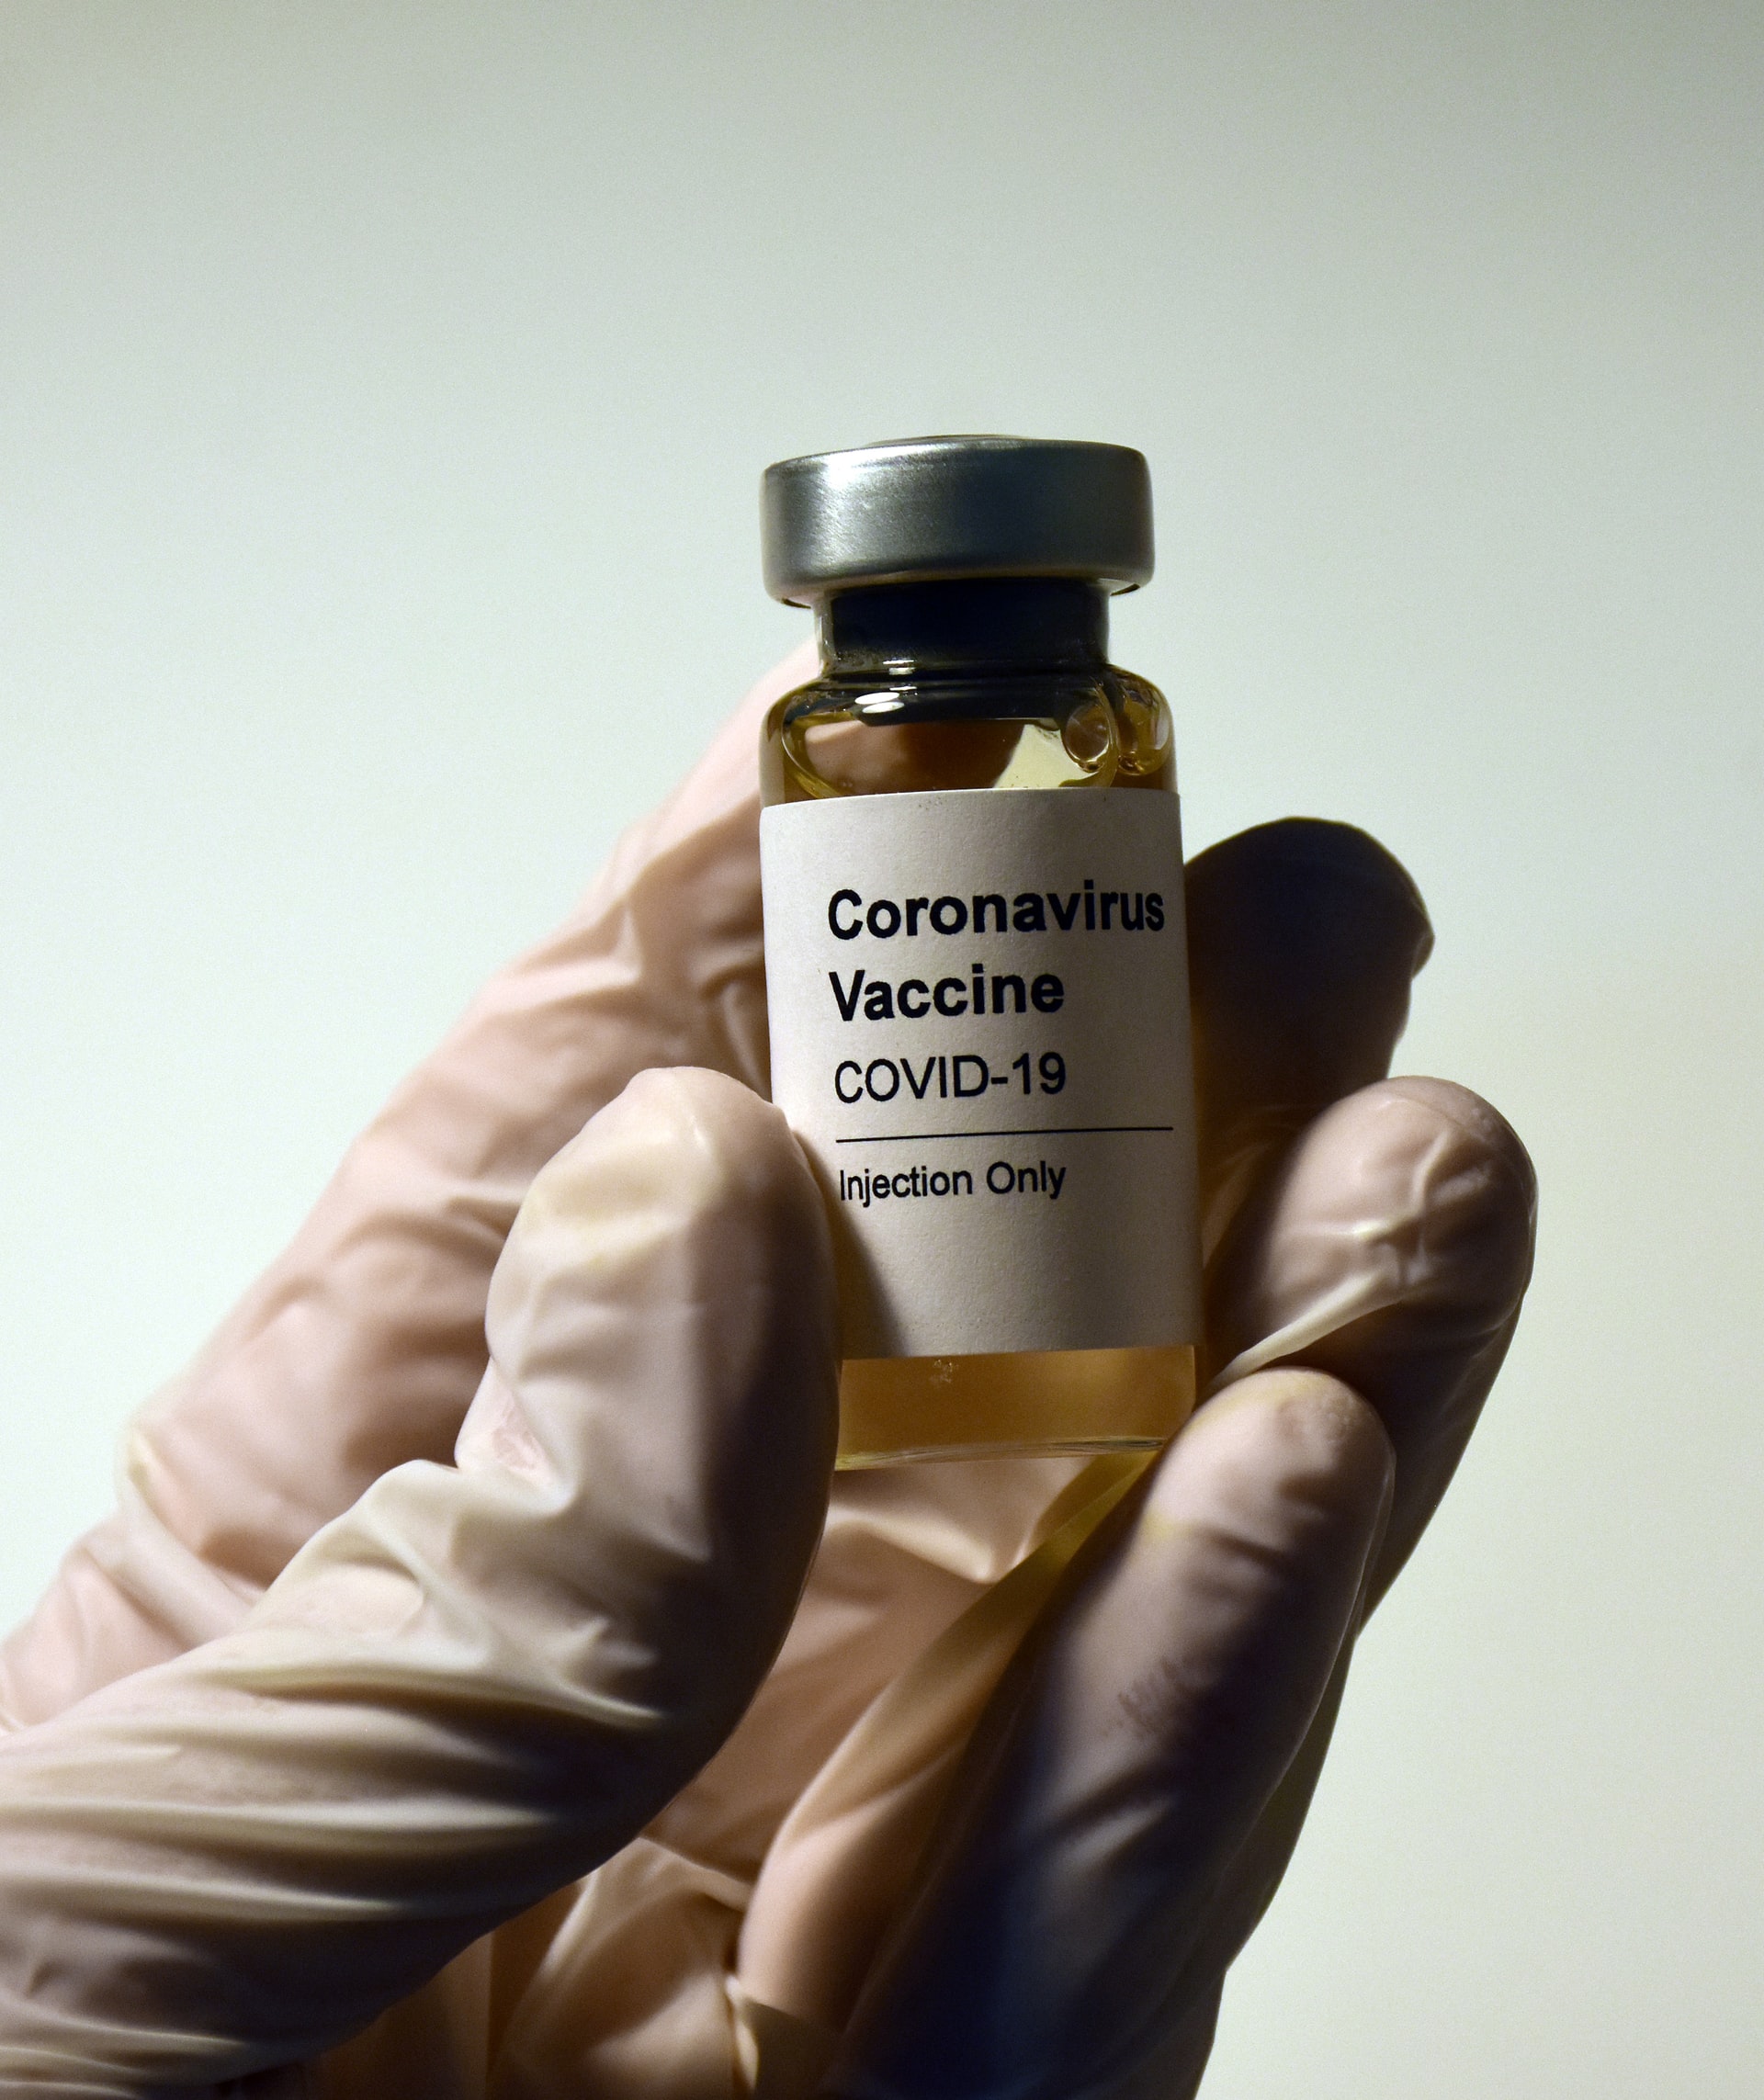 I Got the COVID-19 Vaccine. Now What?